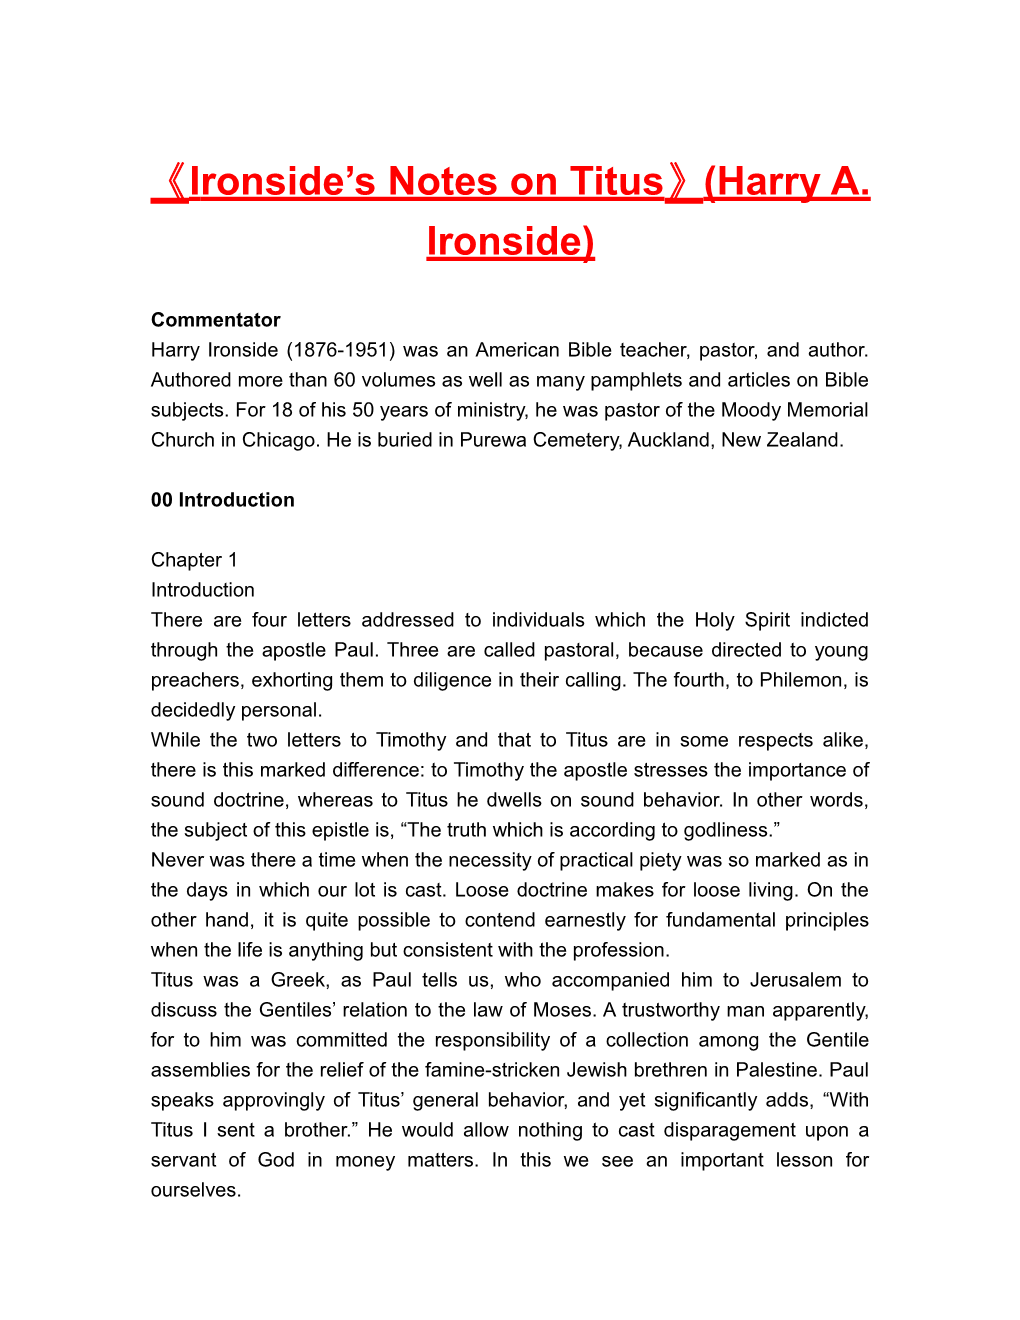 Ironside S Notes on Titus (Harry A. Ironside)